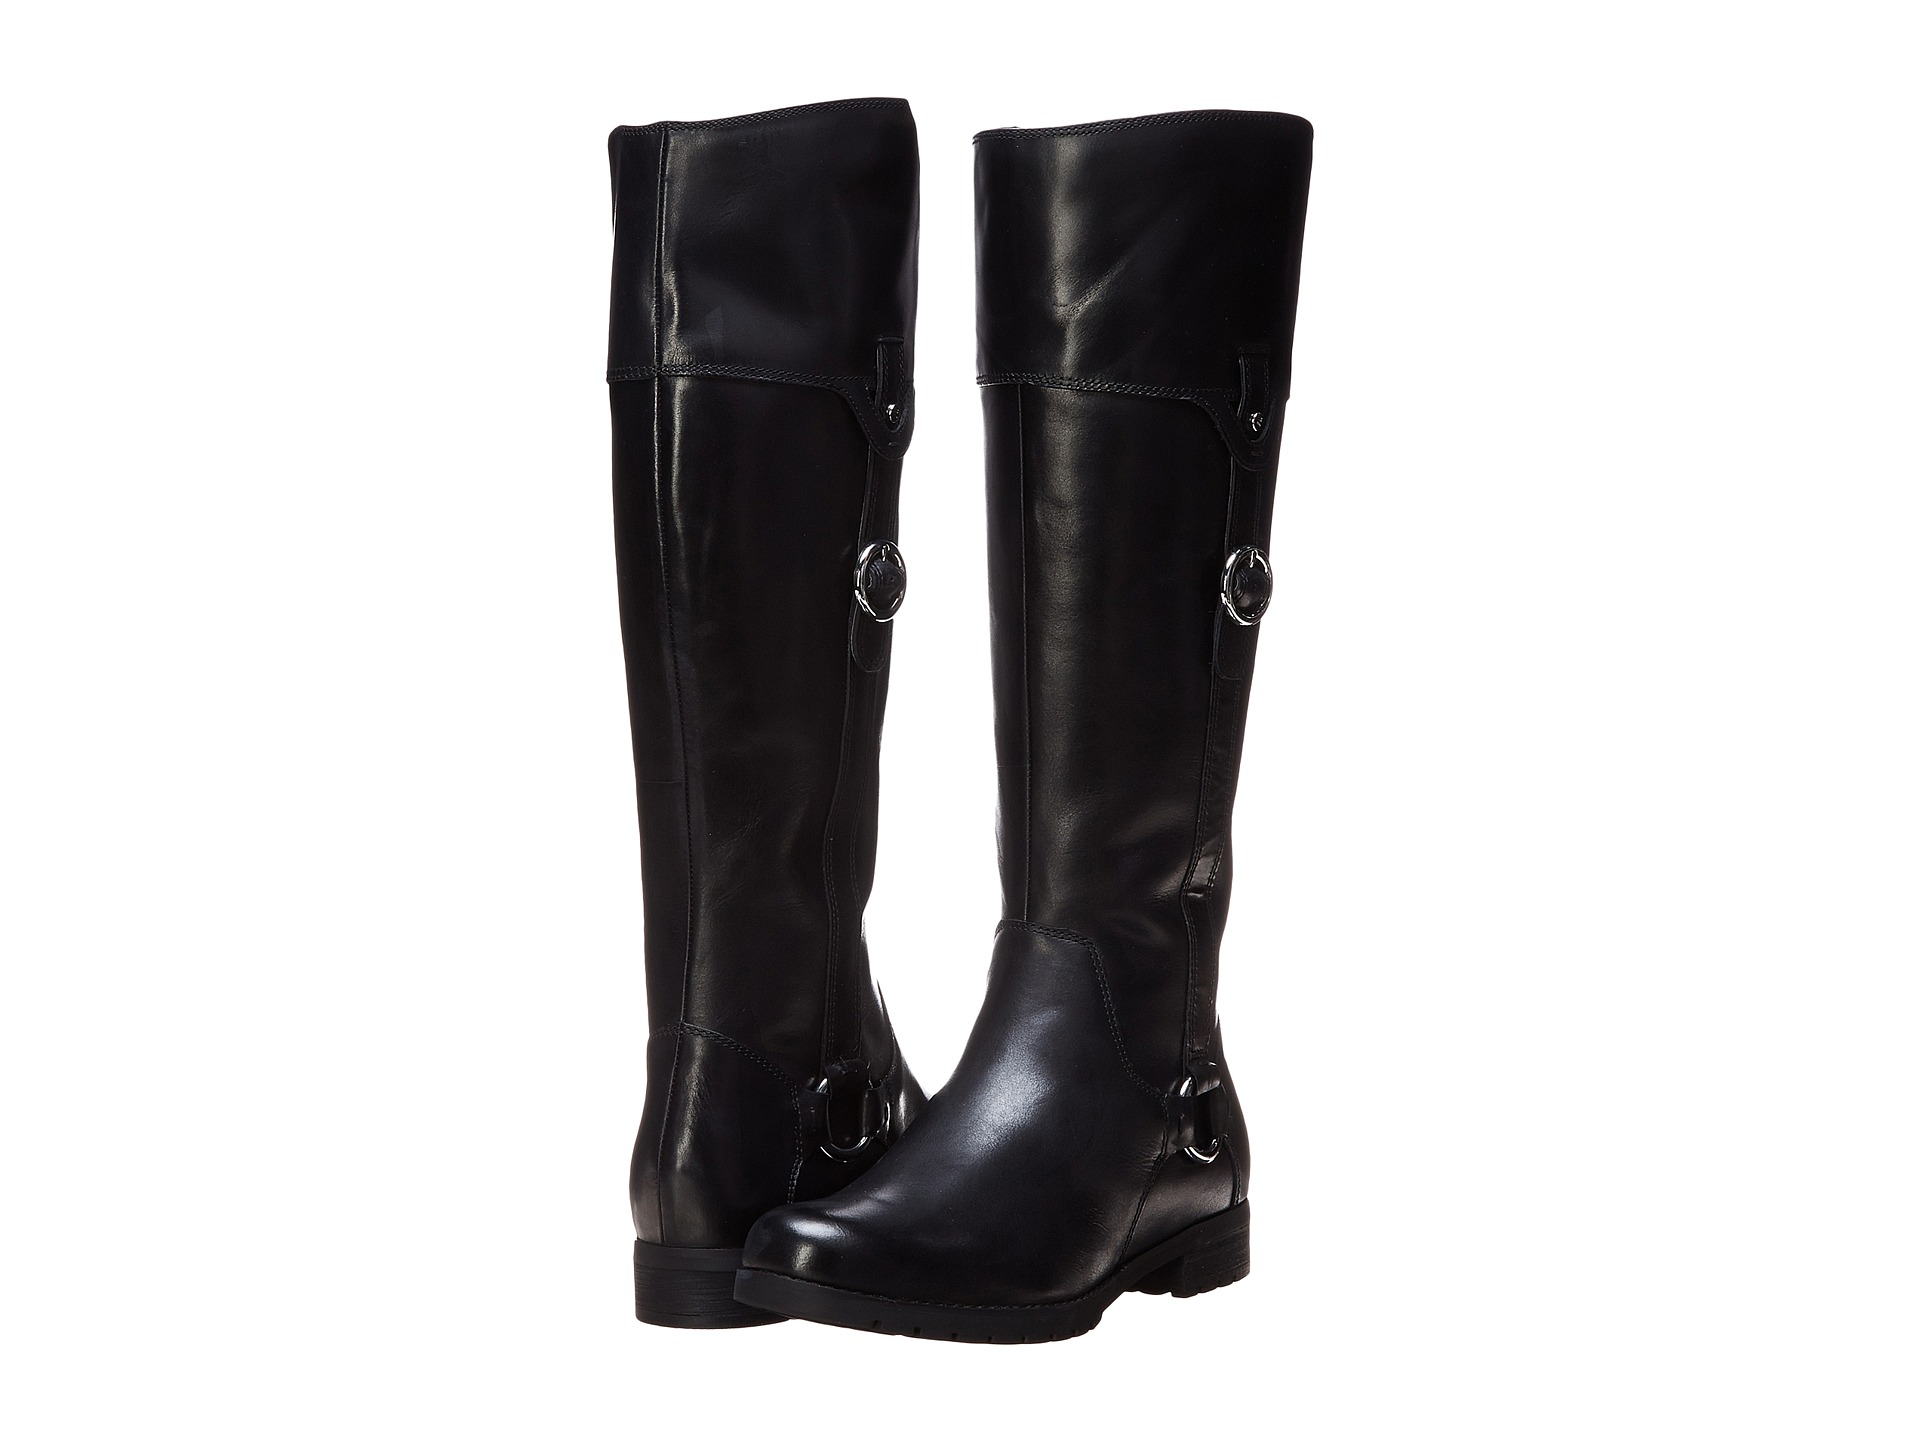 Rockport Tristina Buckle Riding Boot | Shipped Free at Zappos